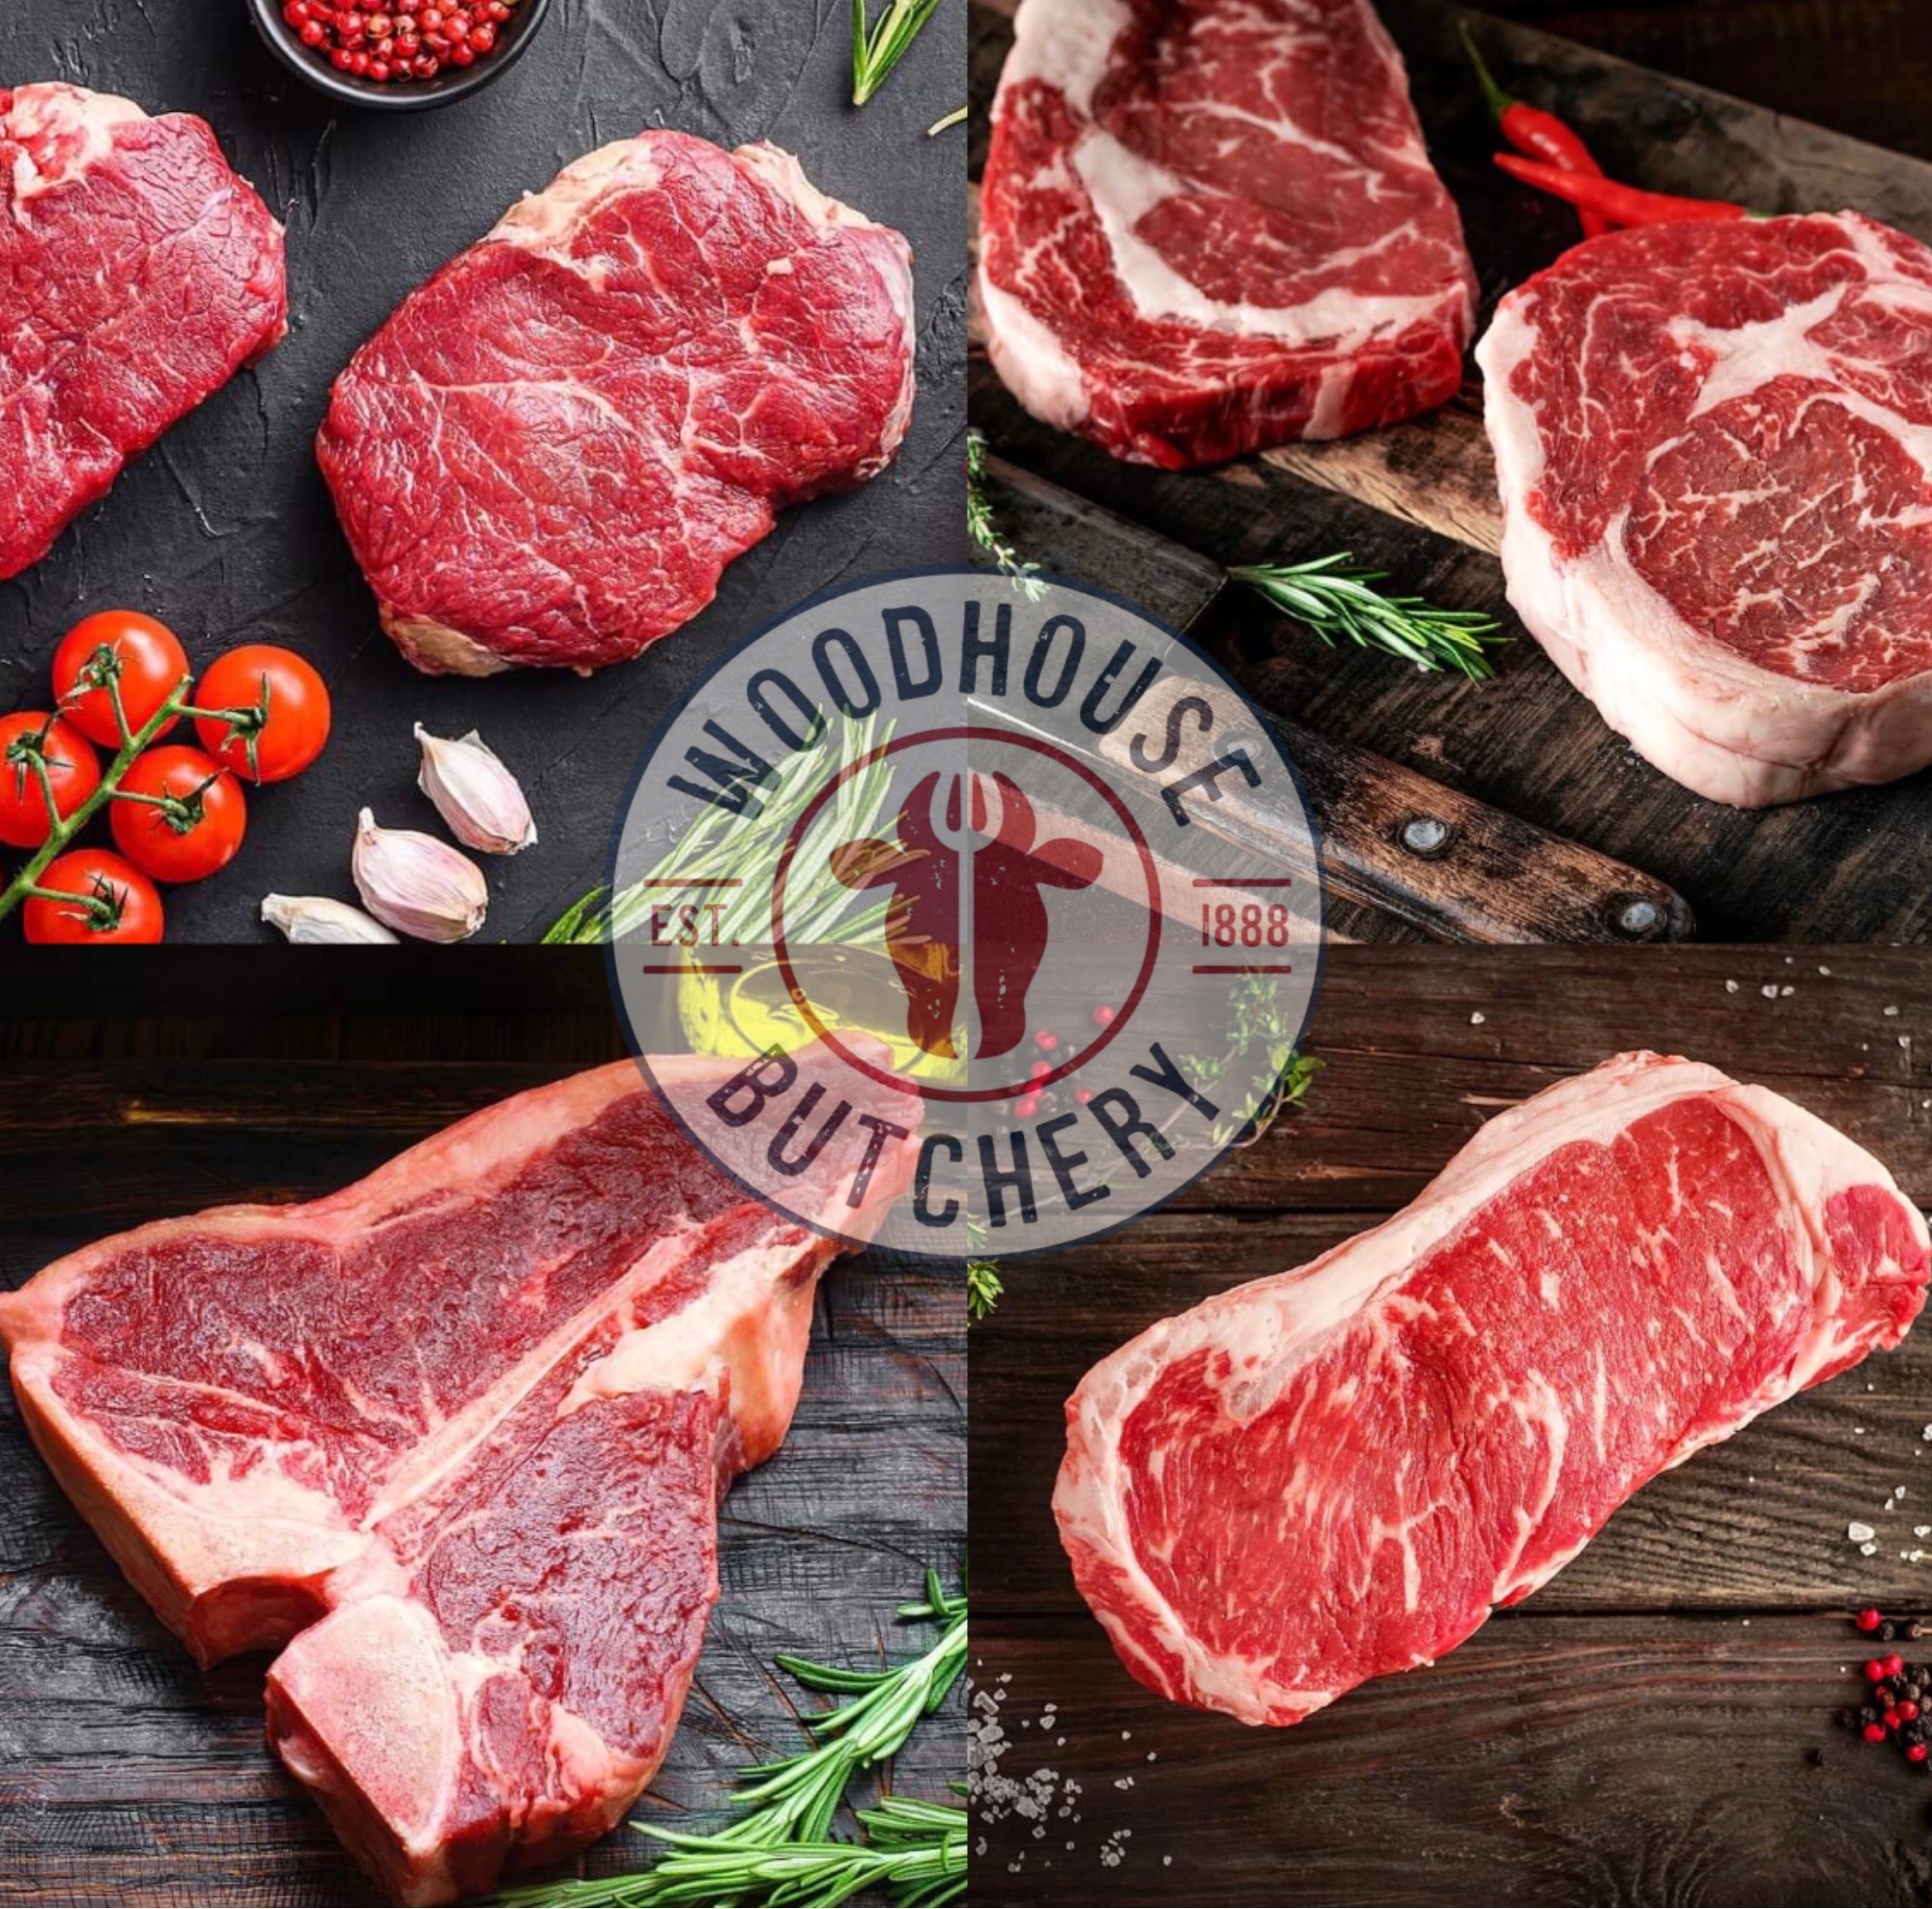 Meat from Woodhouse Butchery, Haywards Heath, Sussex